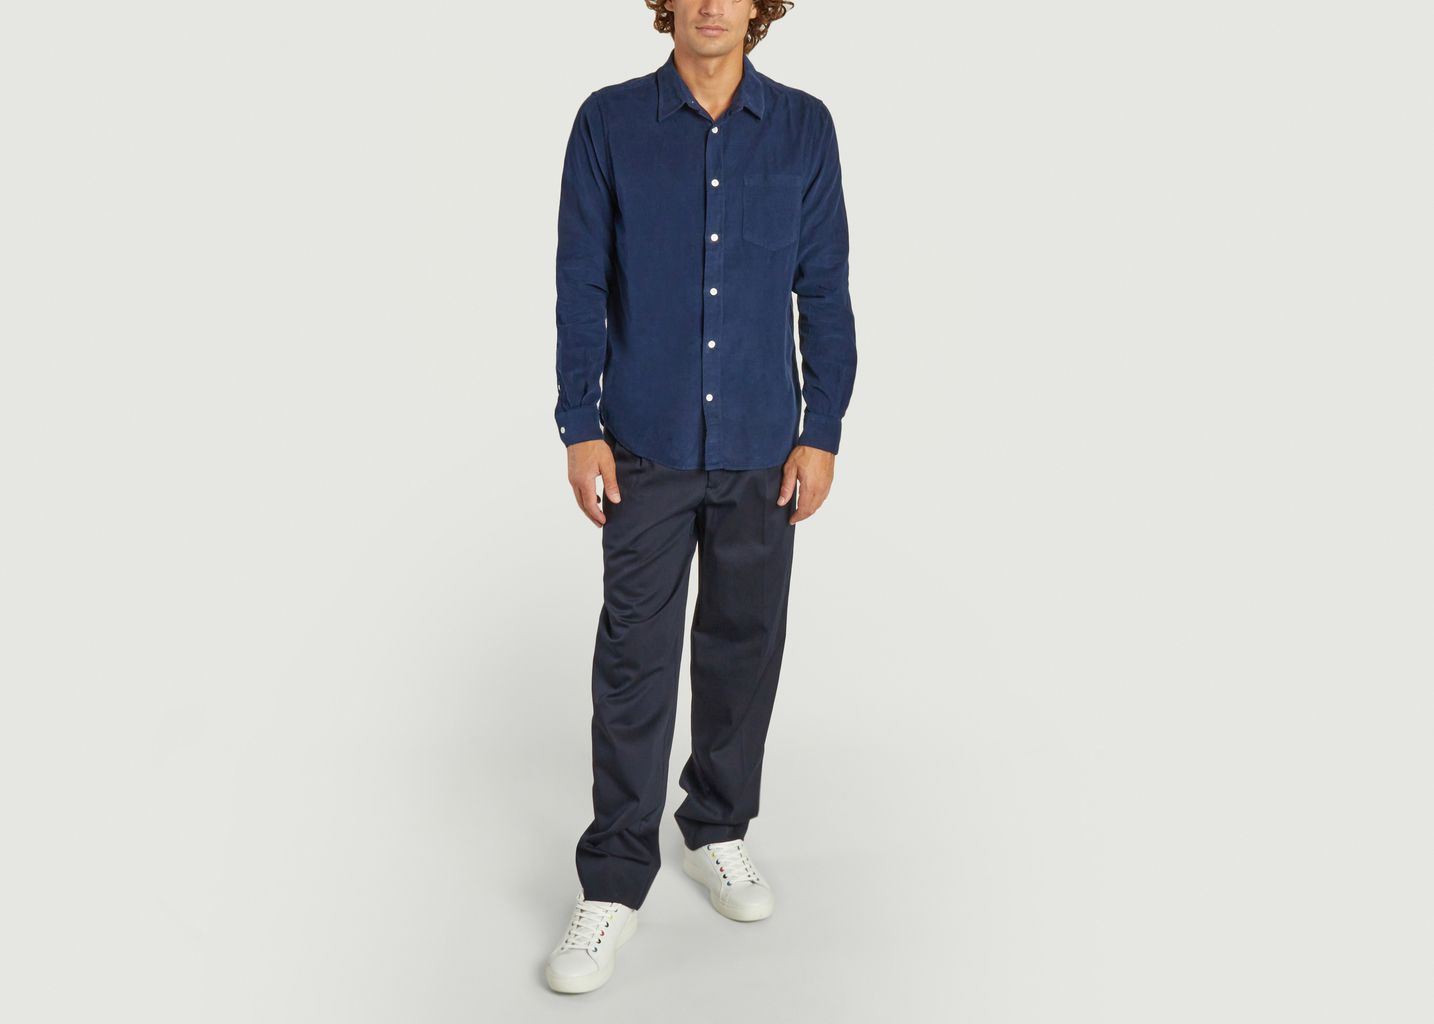 Osvald corduroy shirt  - Norse Projects